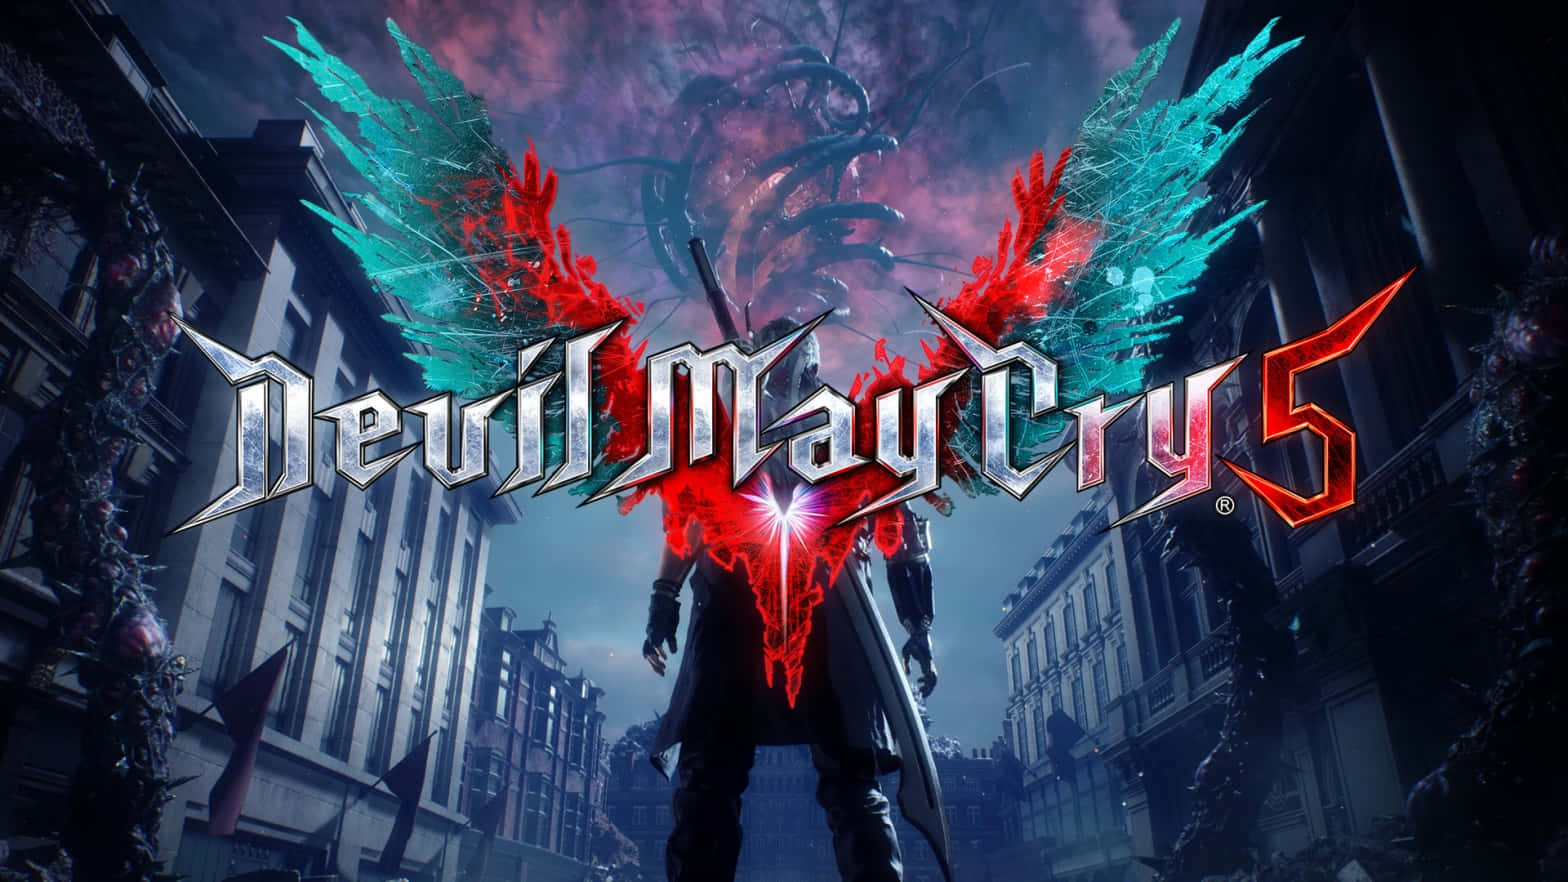 Iconic Devil May Cry Characters in Battle Wallpaper